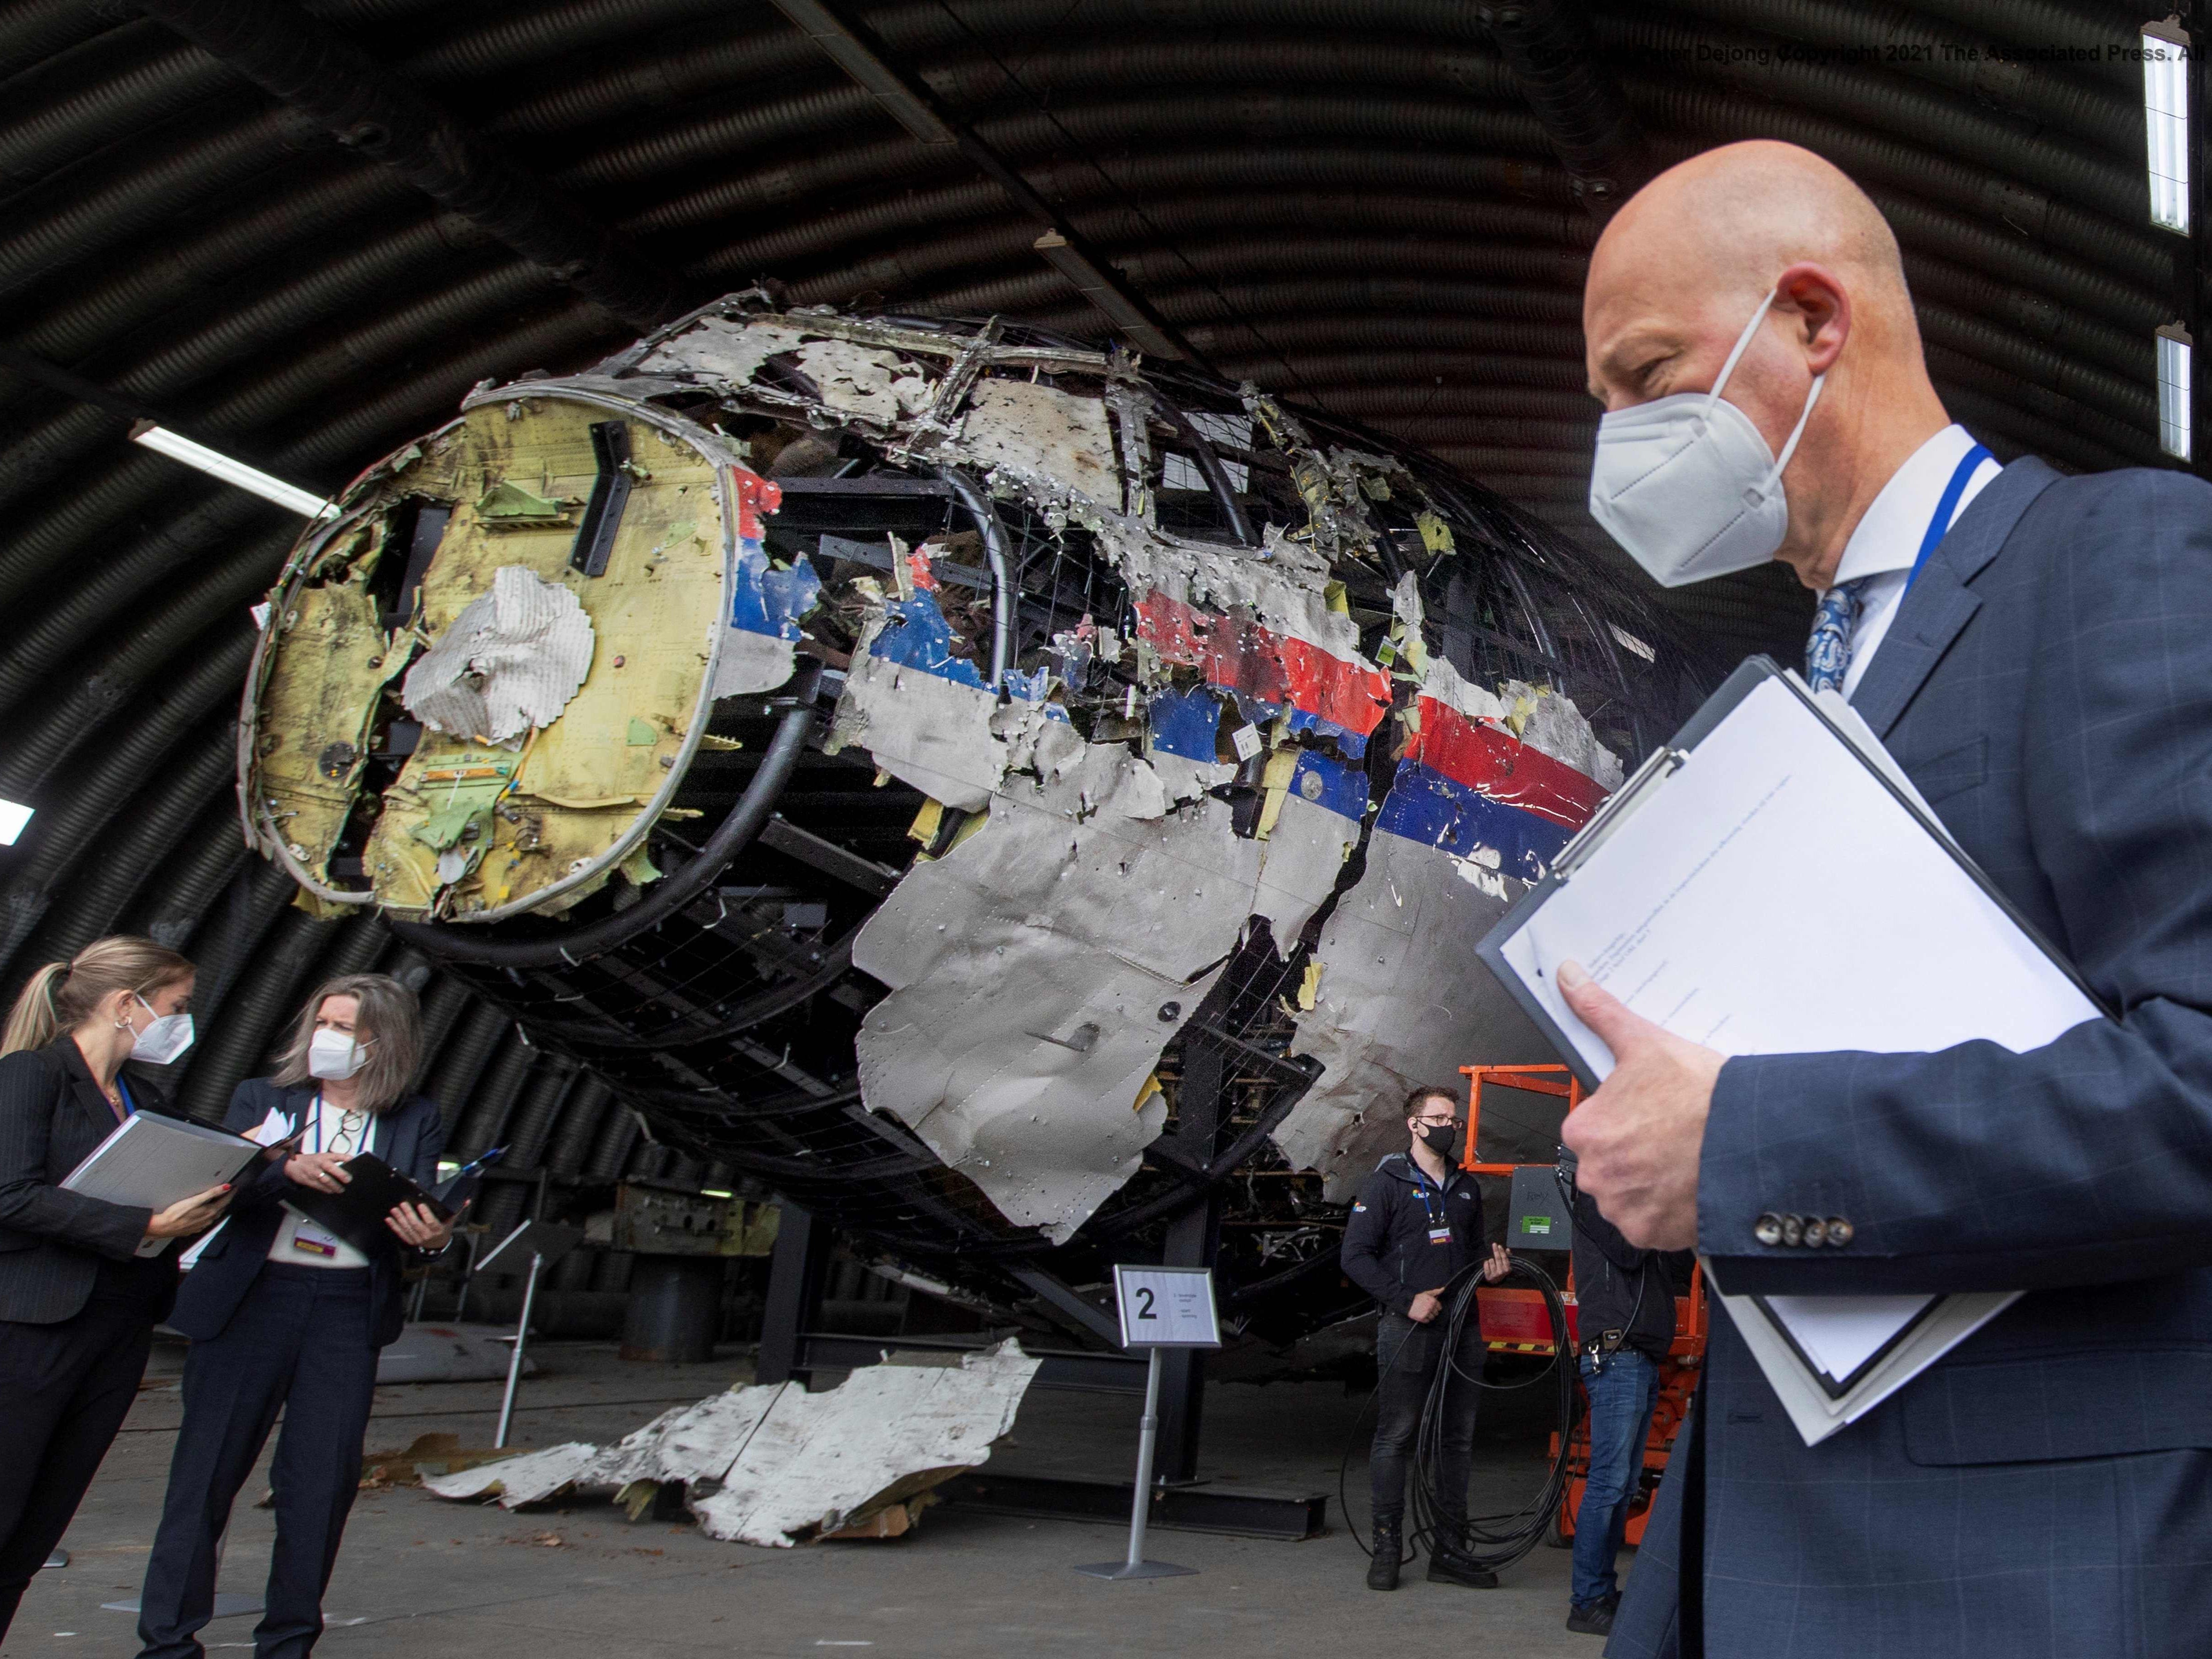 Hendrik Steenhuis views the reconstructed wreckage of Malaysia Airlines Flight MH17 at the Gilze-Rijen military airbase on 26 May 2021